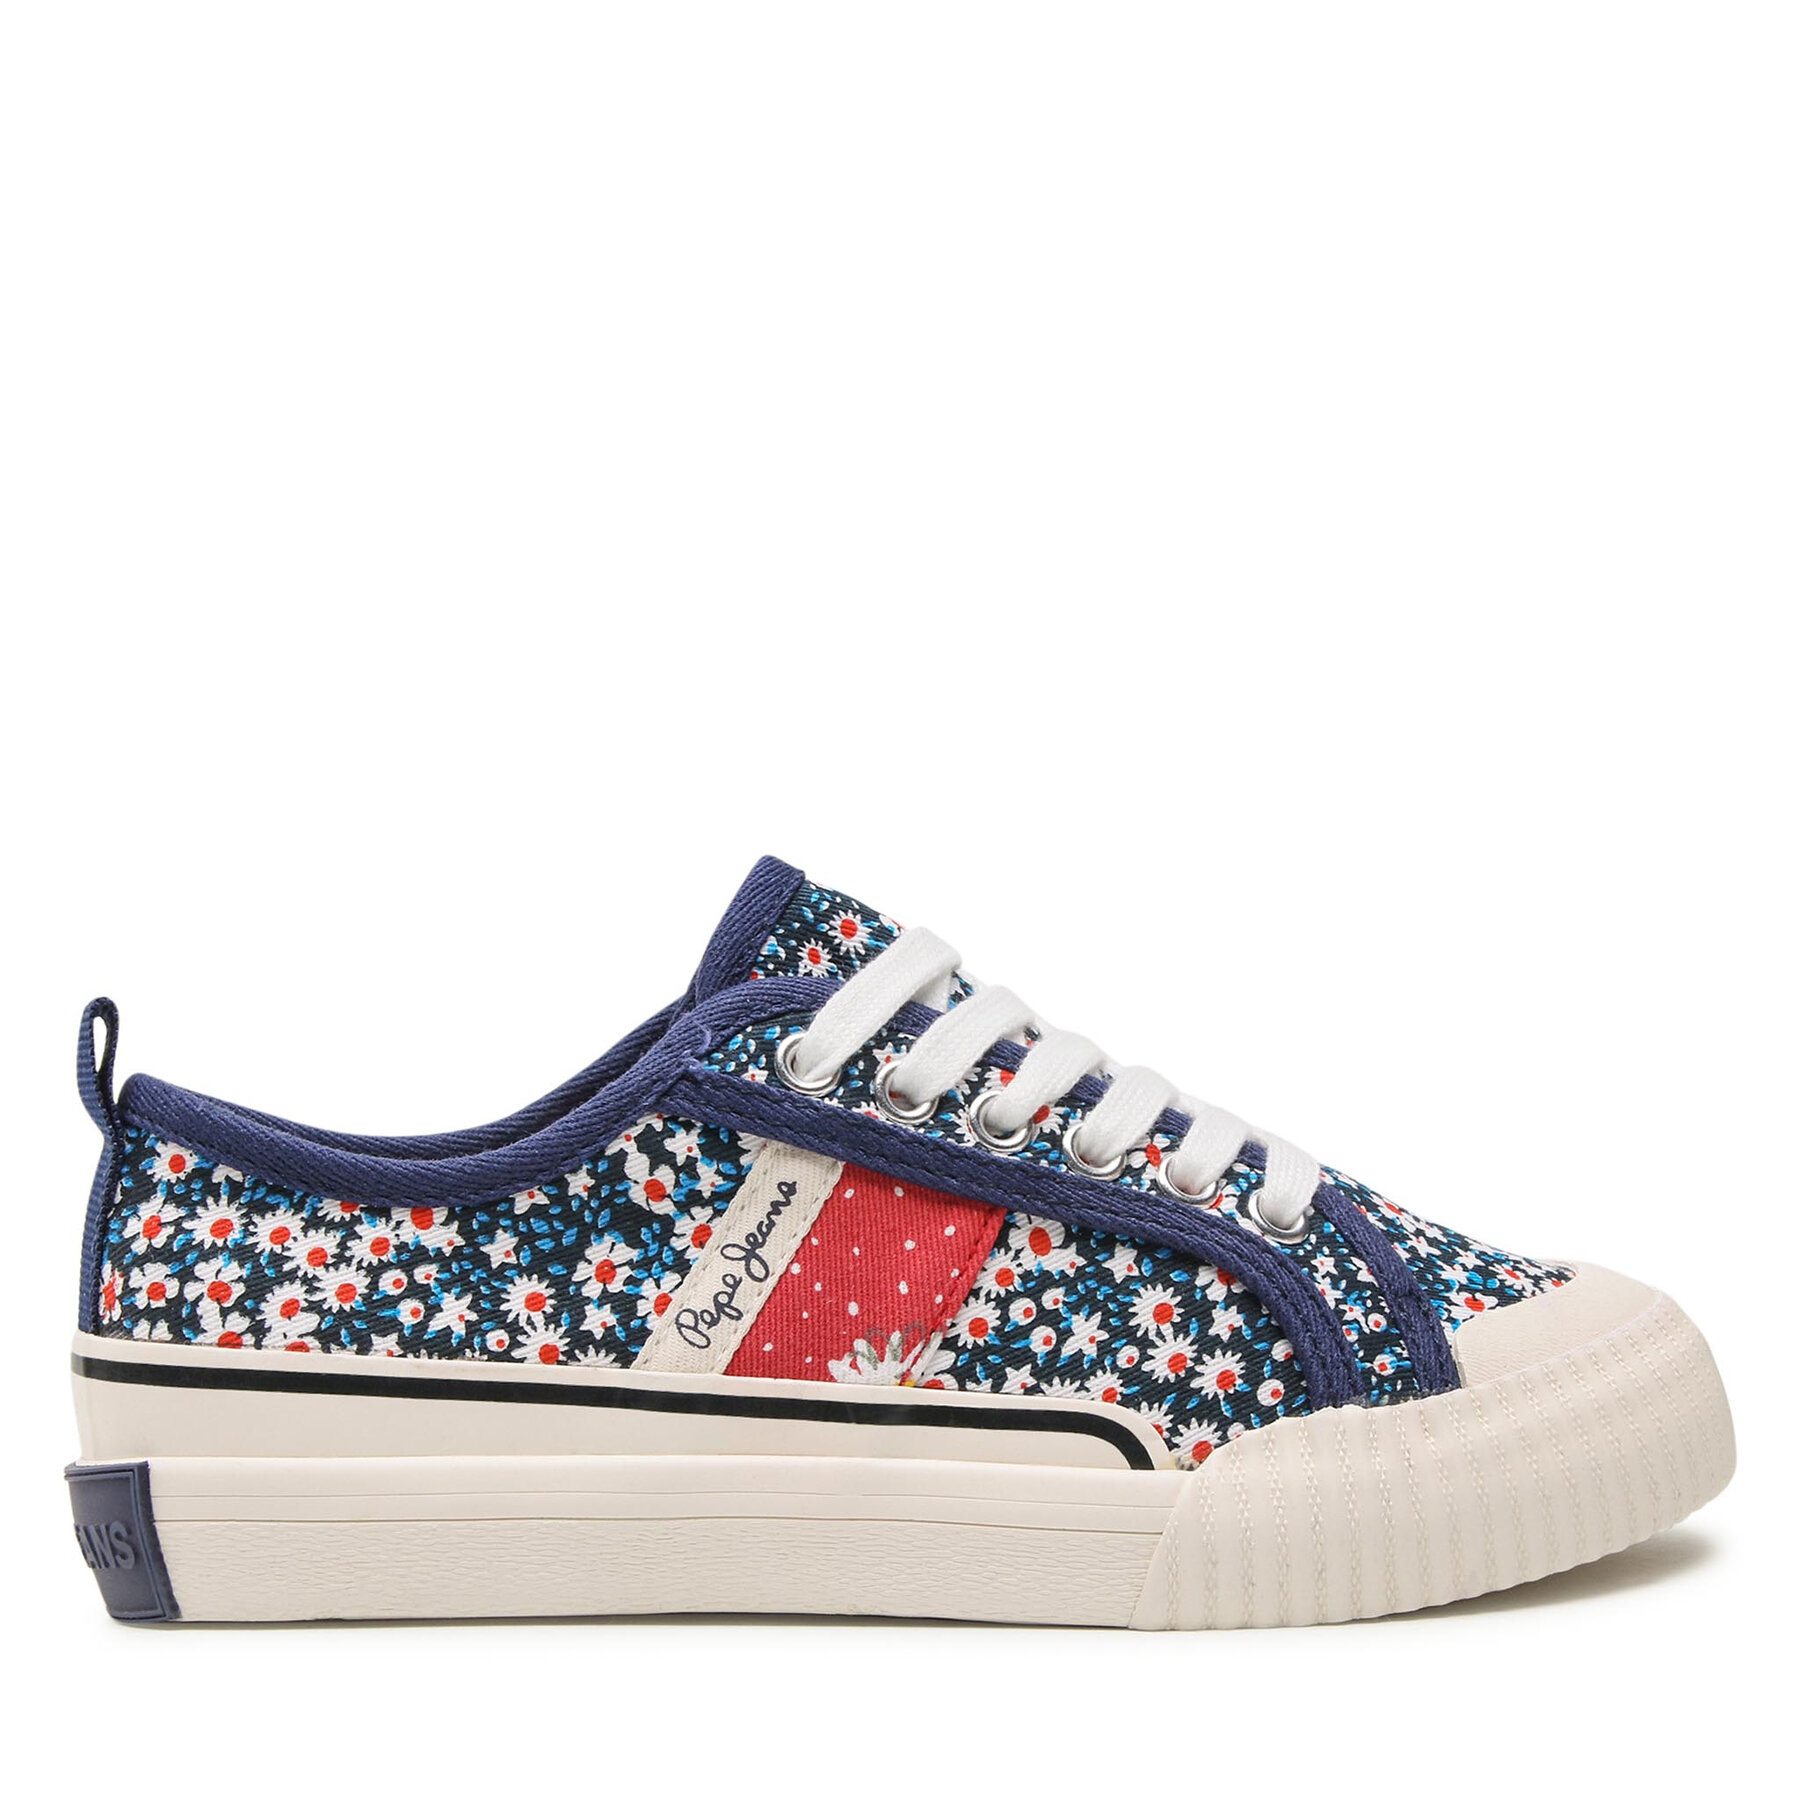 Sneakers aus Stoff Pepe Jeans Ottis Flower Girl PGS30541 Navy 595 von Pepe Jeans